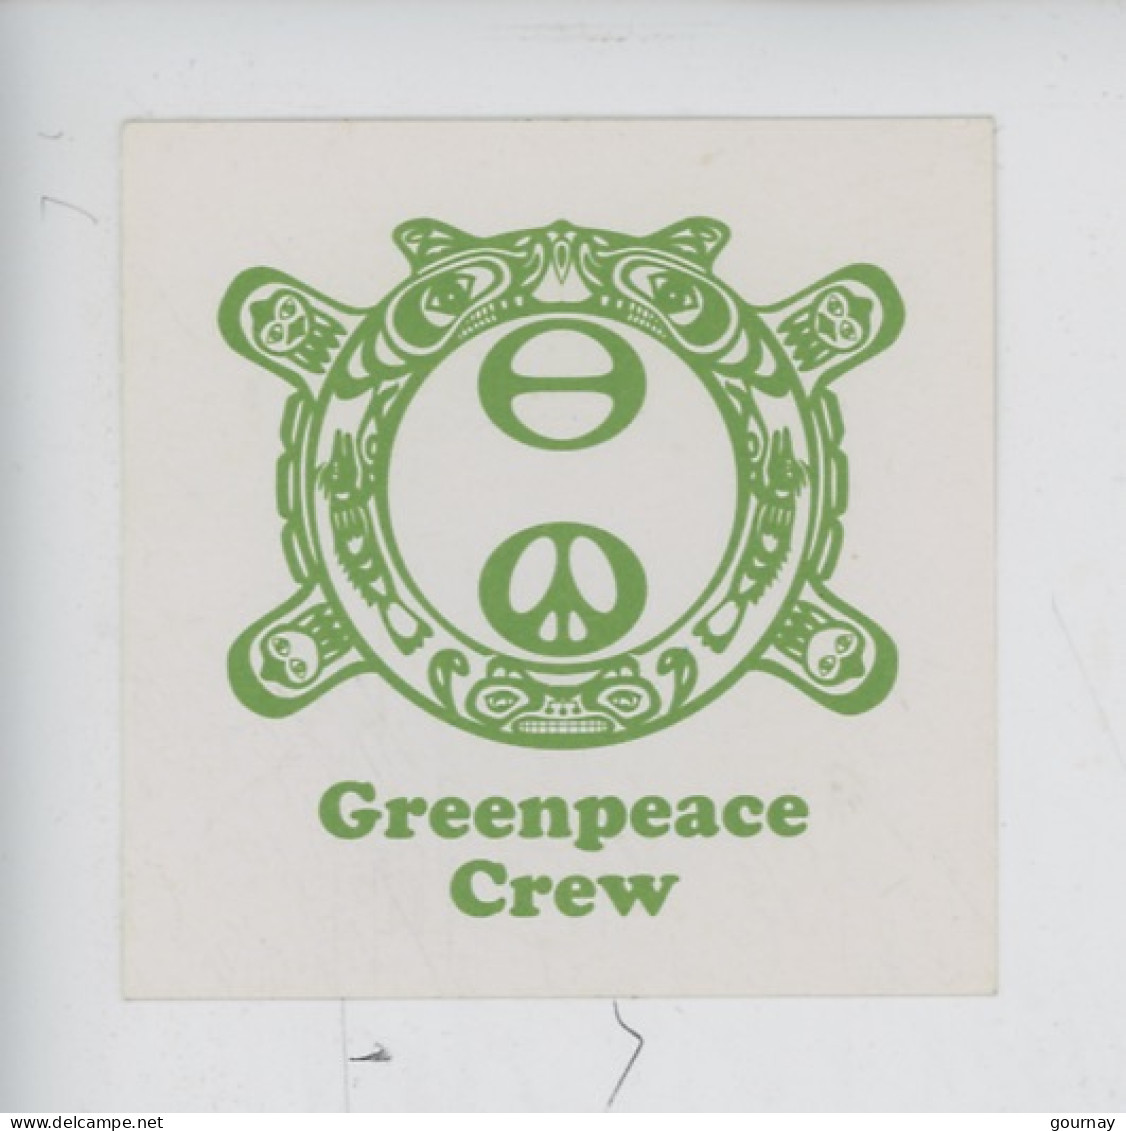 Greenpeace Crew - Autocollant (équipage) - Advertising